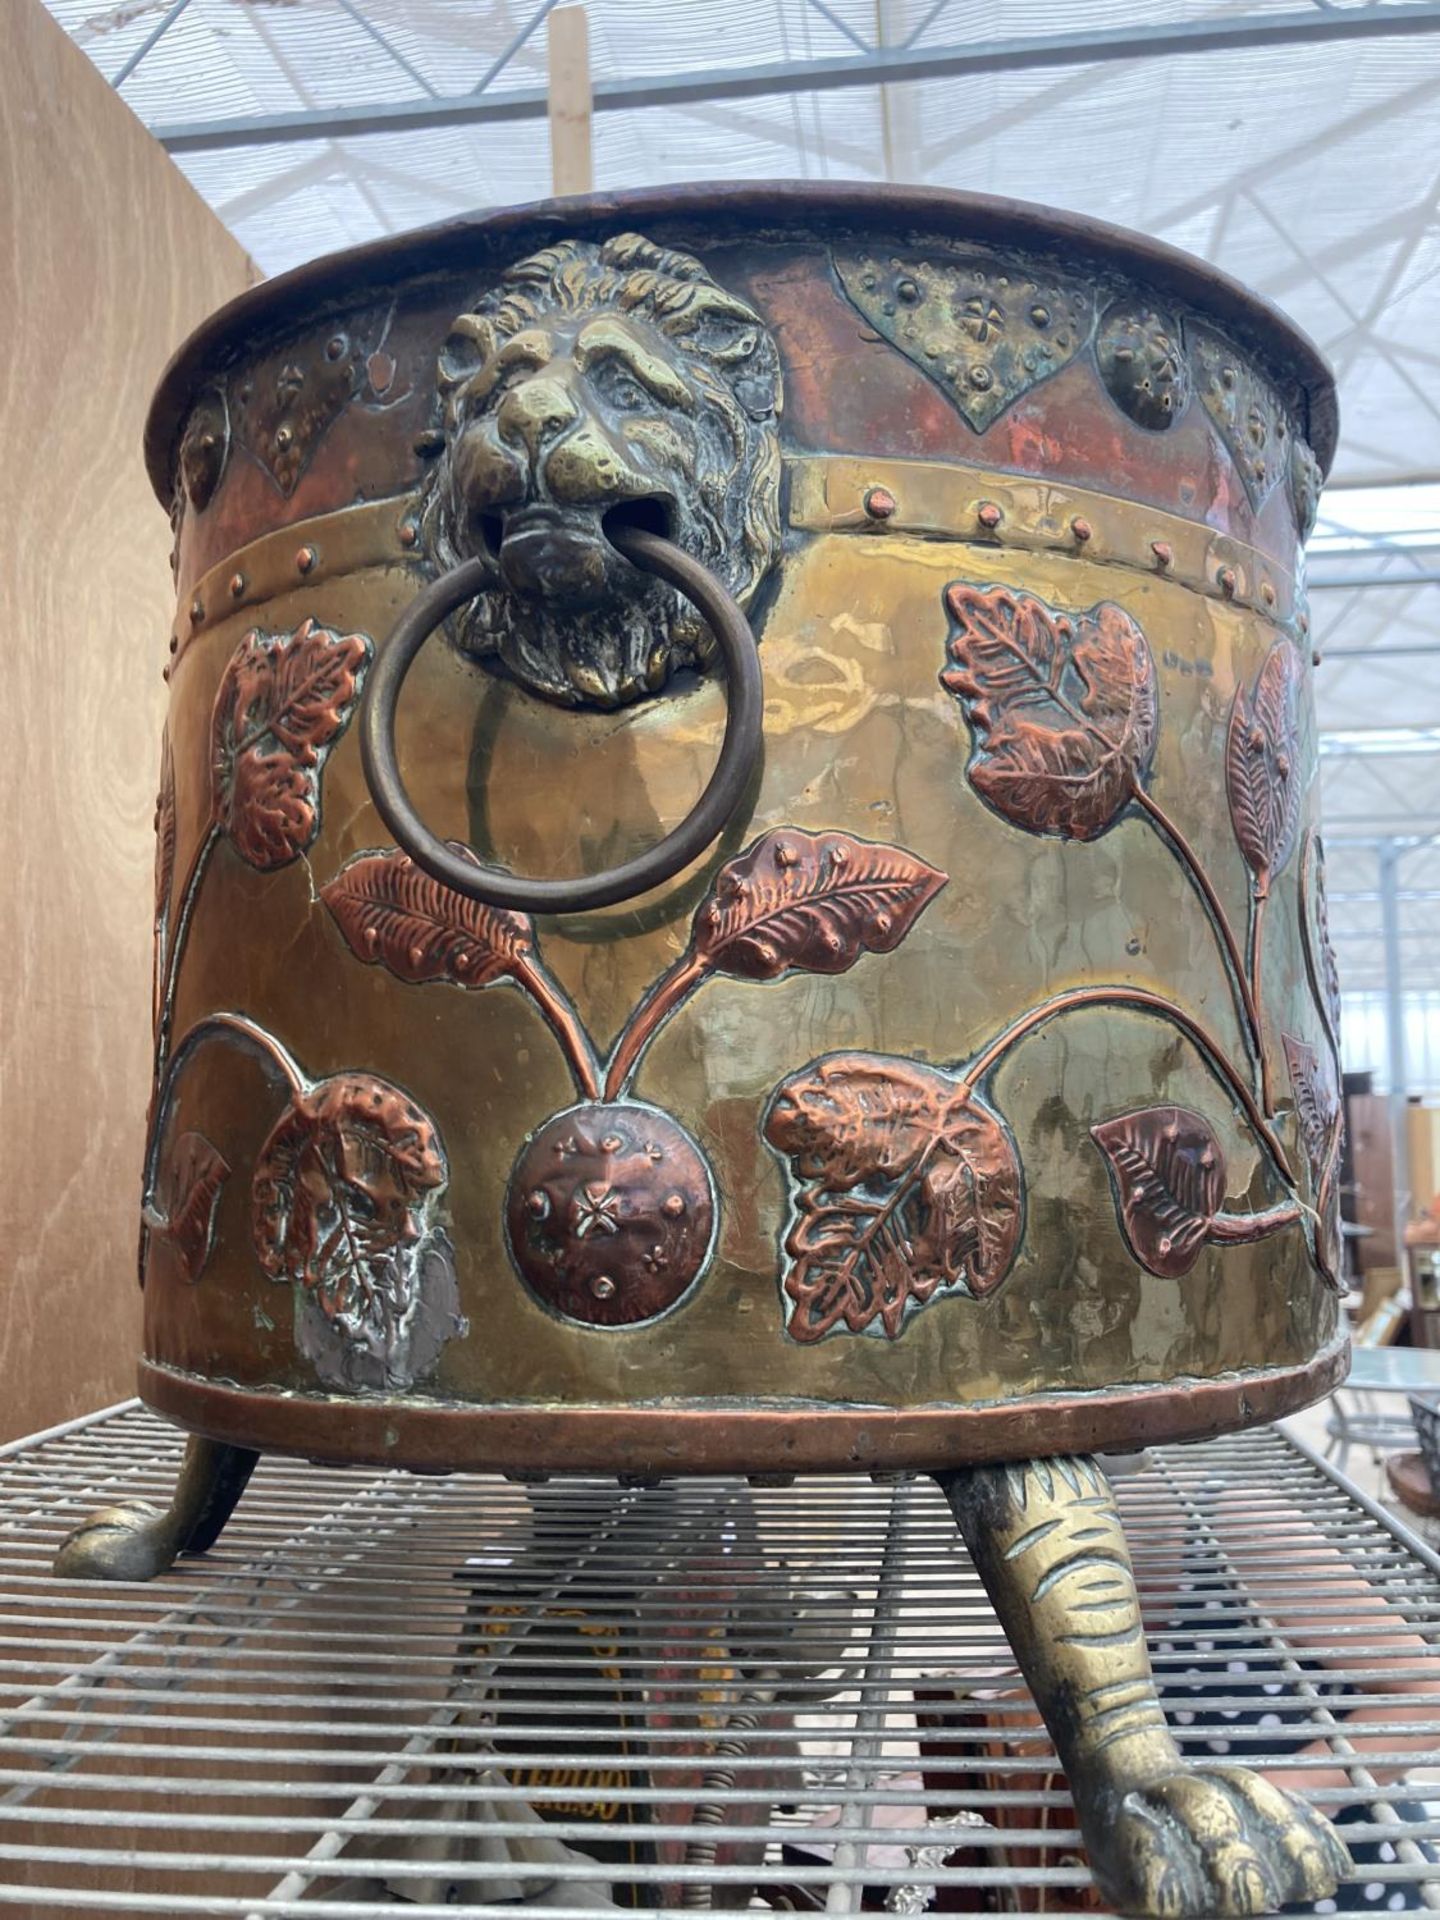 A VERY LARGE DECORATIVE BRASS AND COPPER BUCKET ON THREE CLAW FEET AND LION DESIGN HANDLES WITH